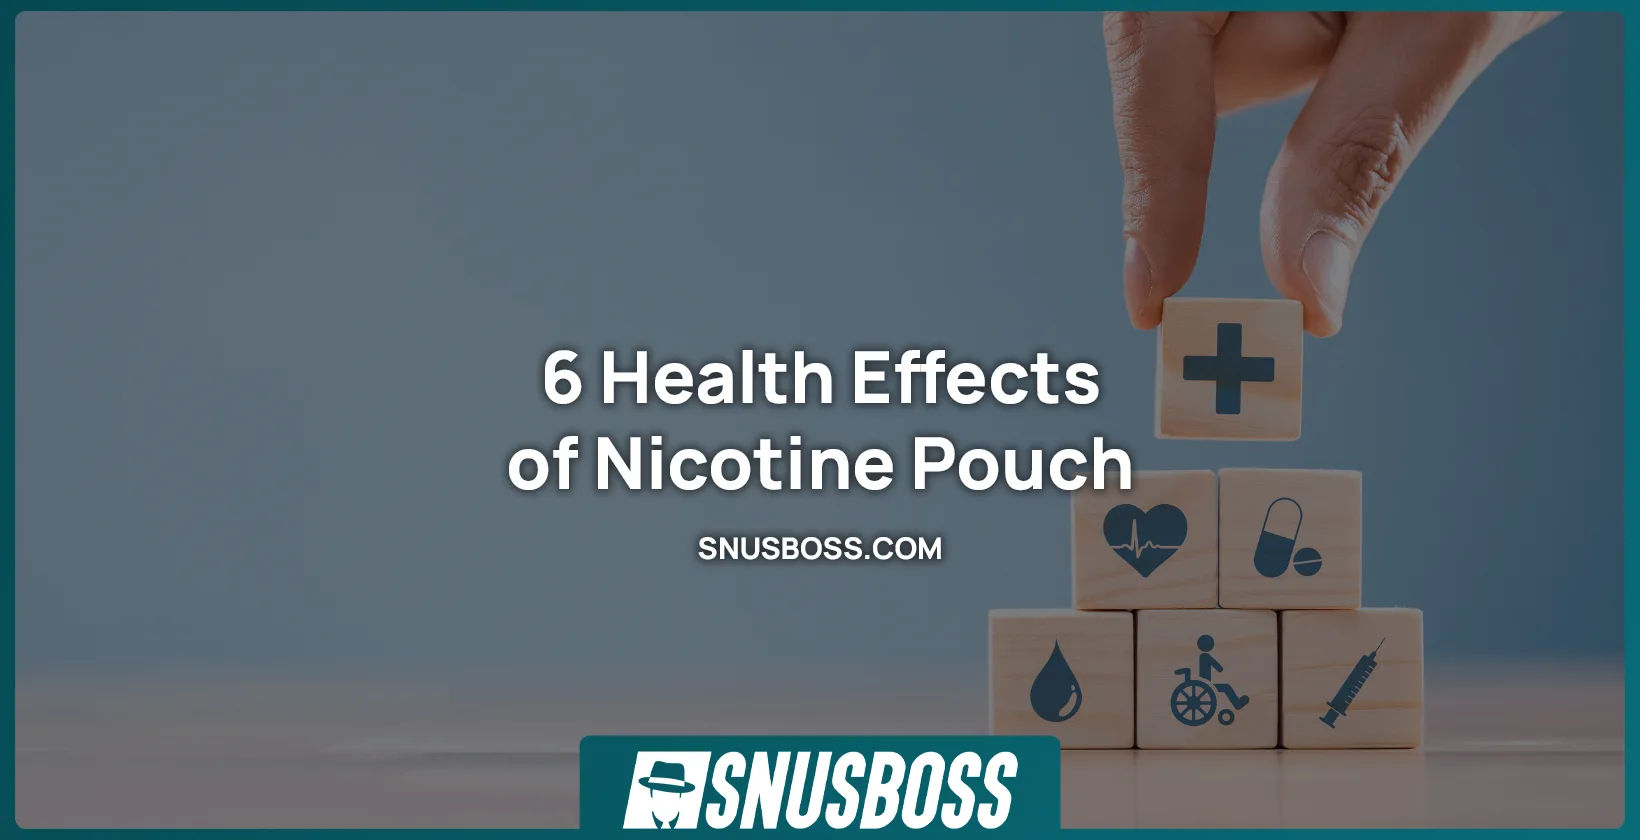 Health effects of Nicotine Pouch